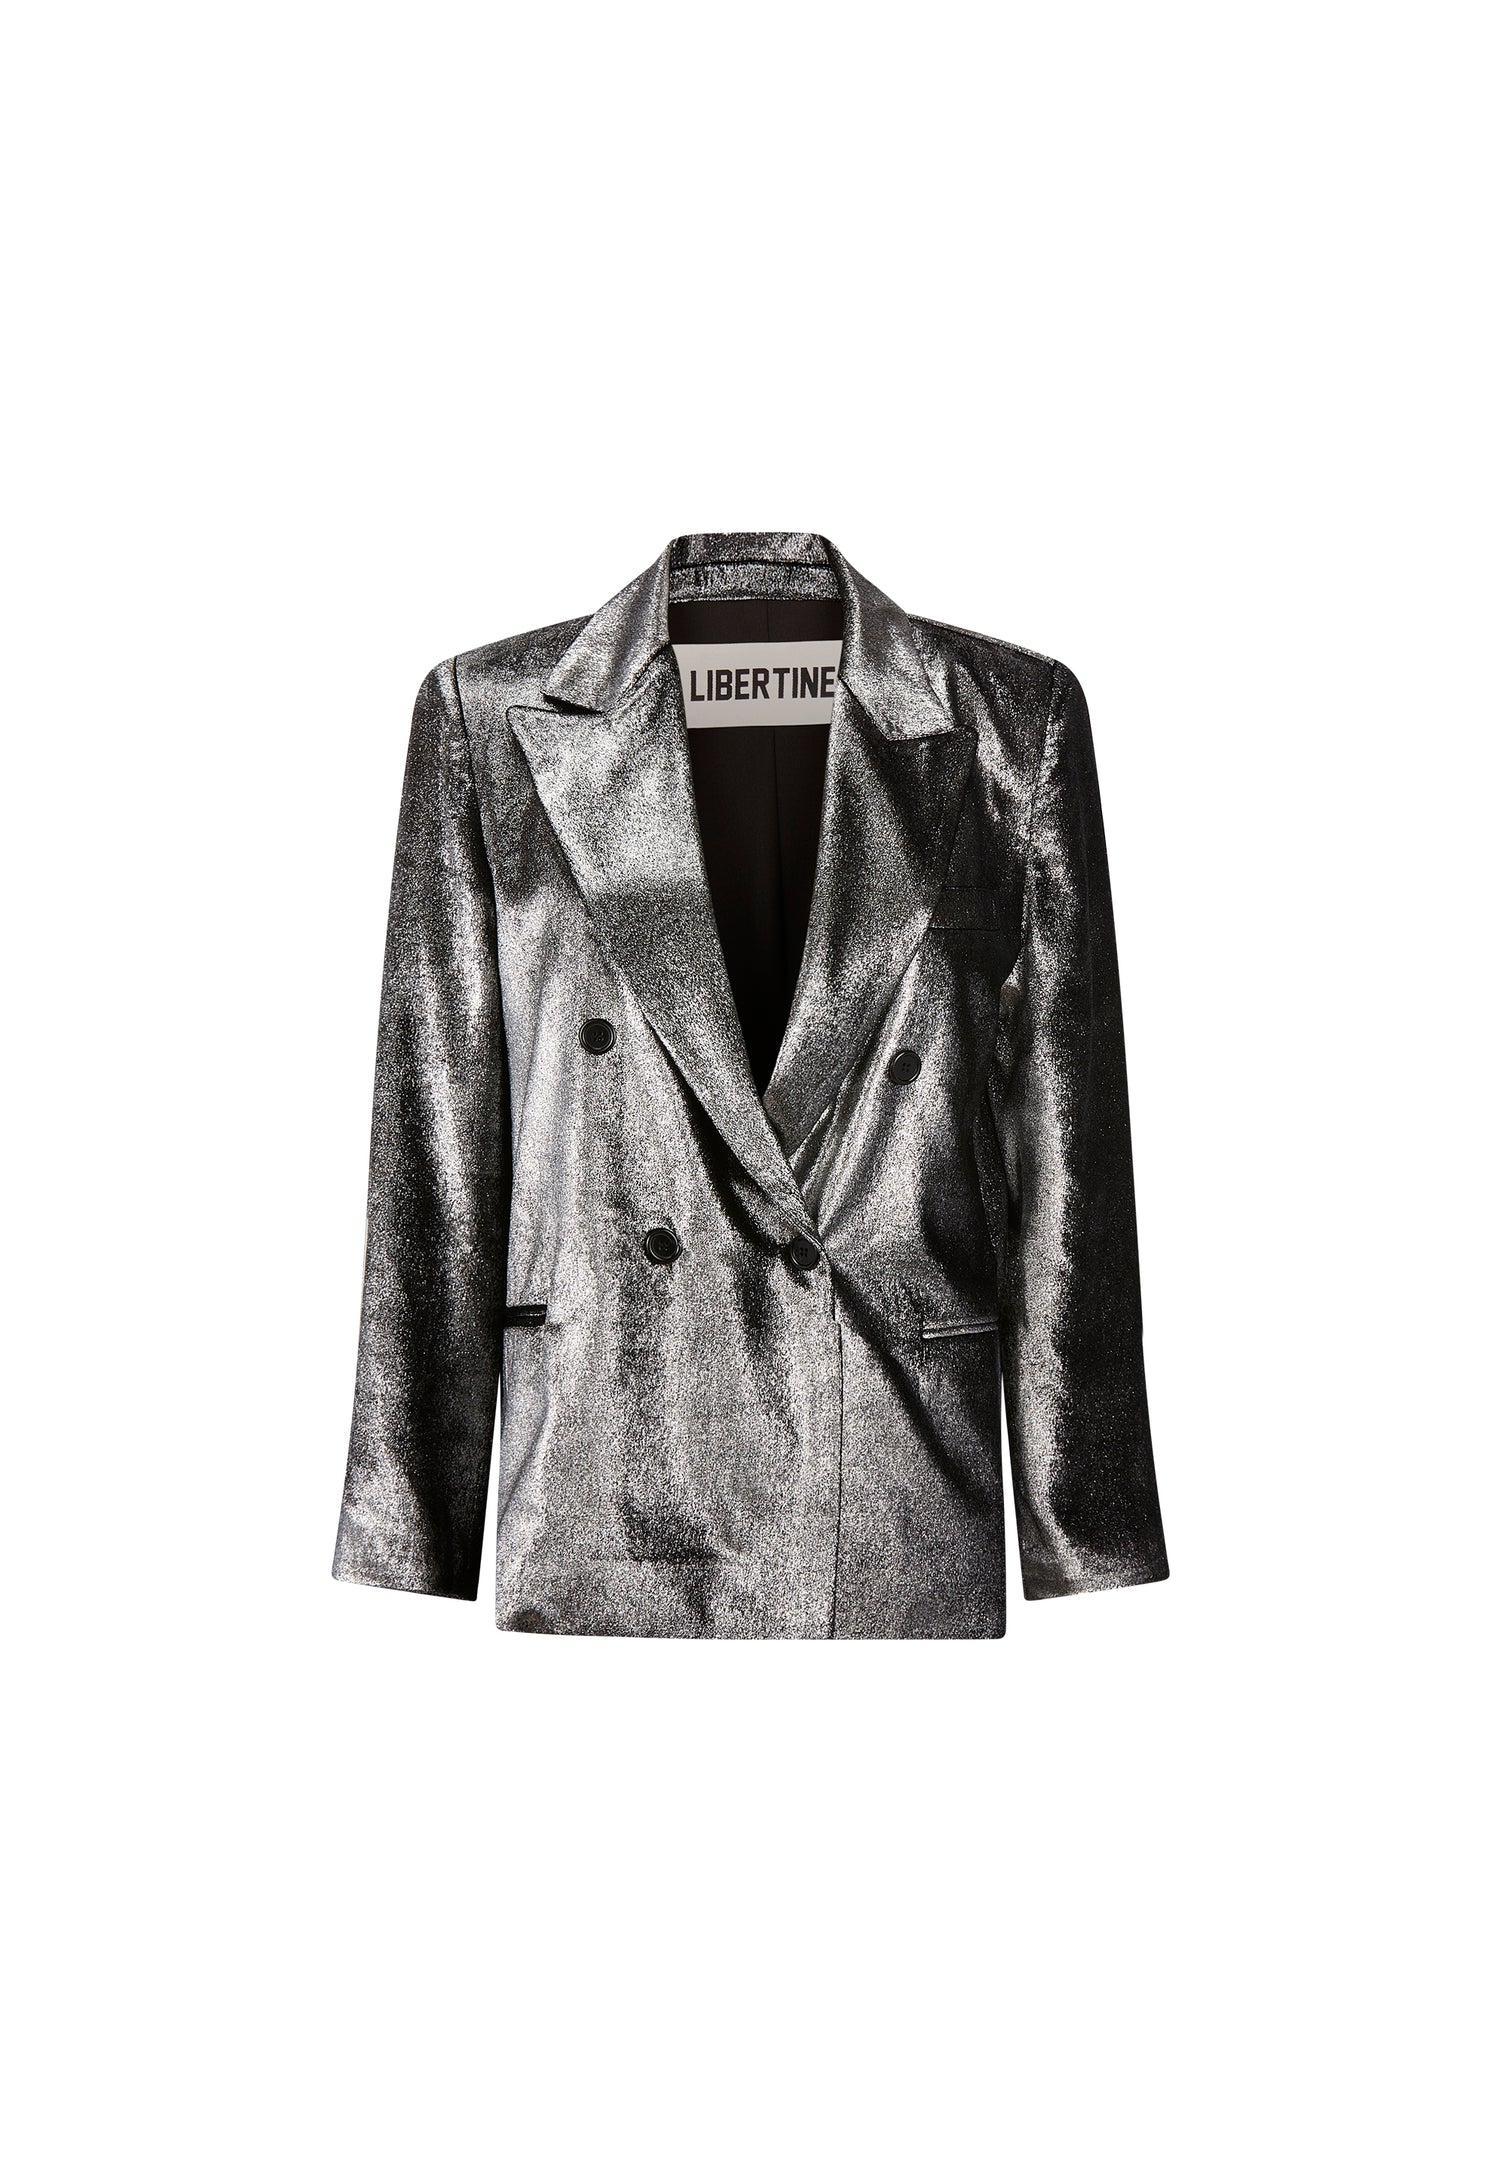 'STERLING' DOUBLE BREASTED JACKET -  - Libertine